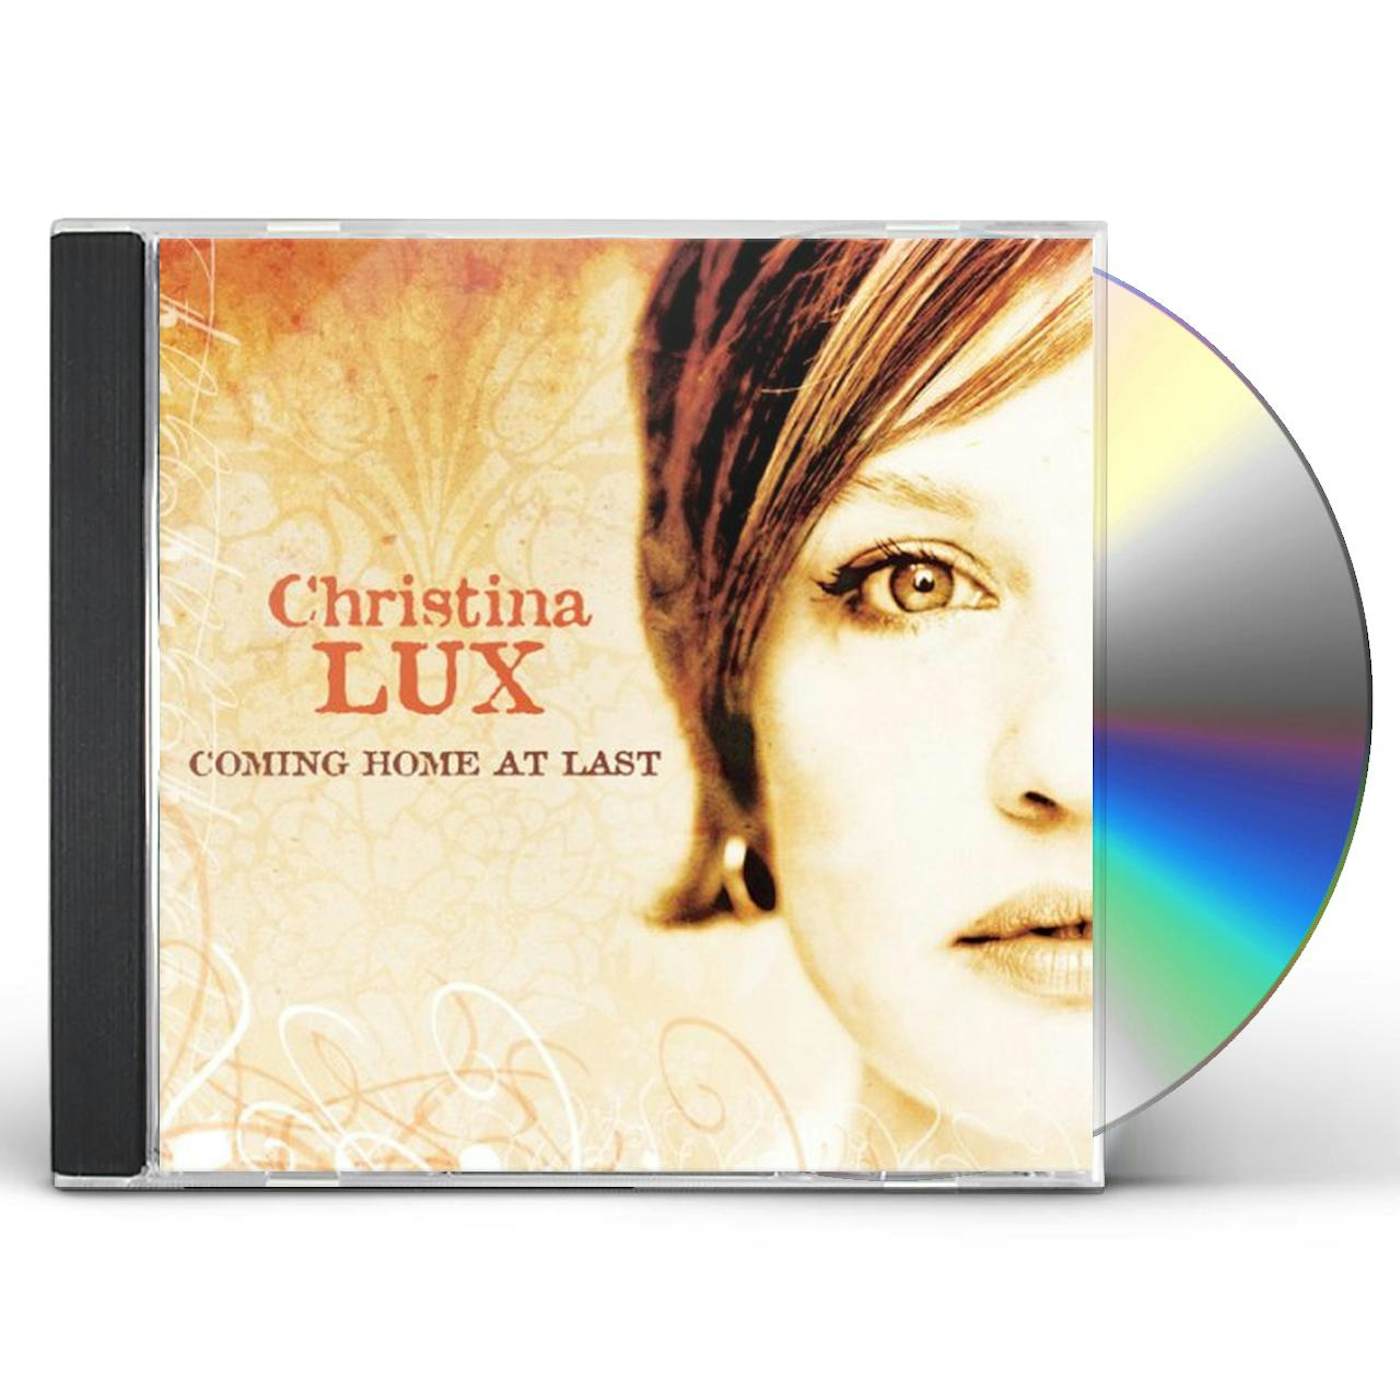 Christina Lux COMING HOME AT LAST CD